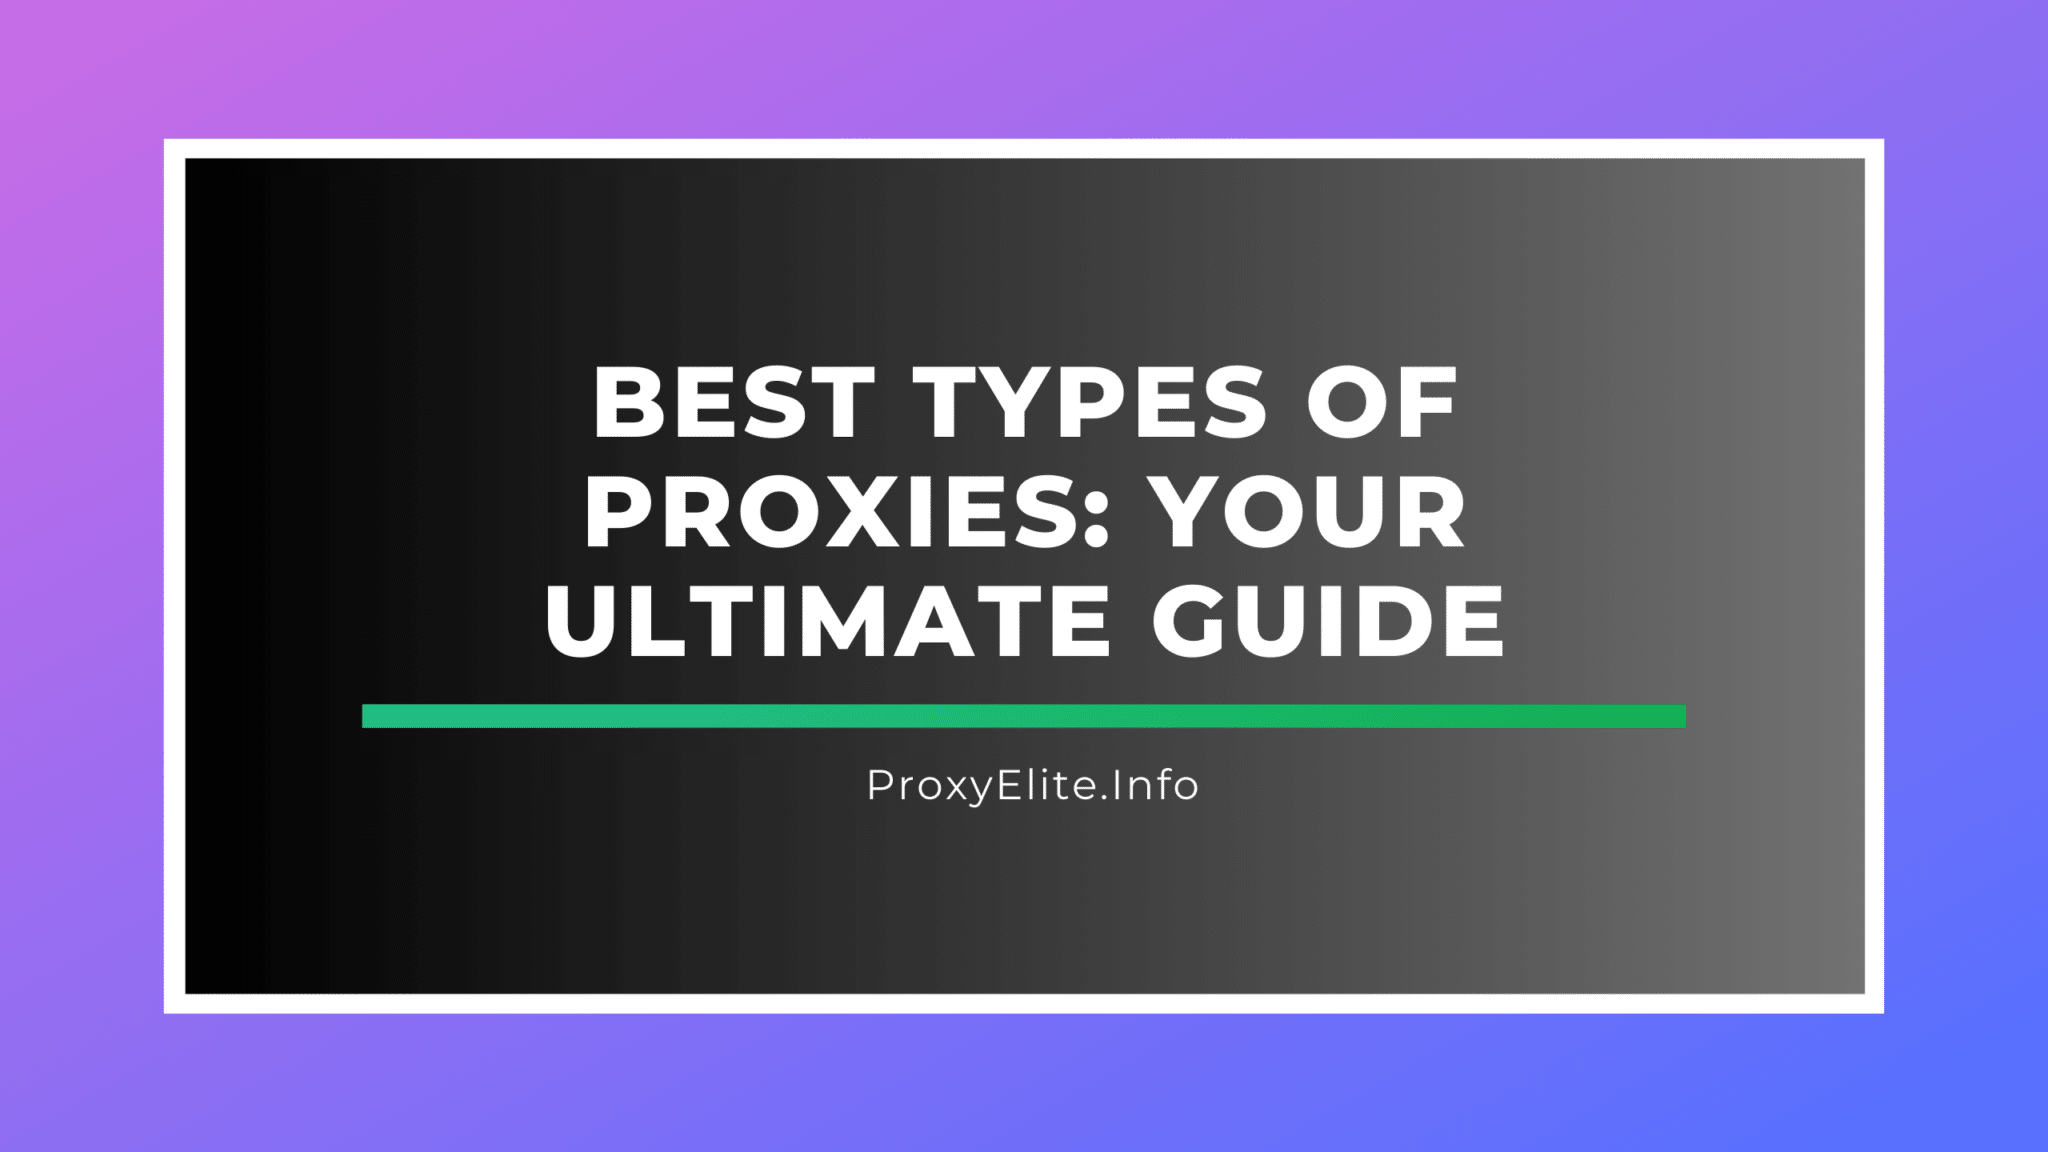 Best Types of Proxies: Your Ultimate Guide